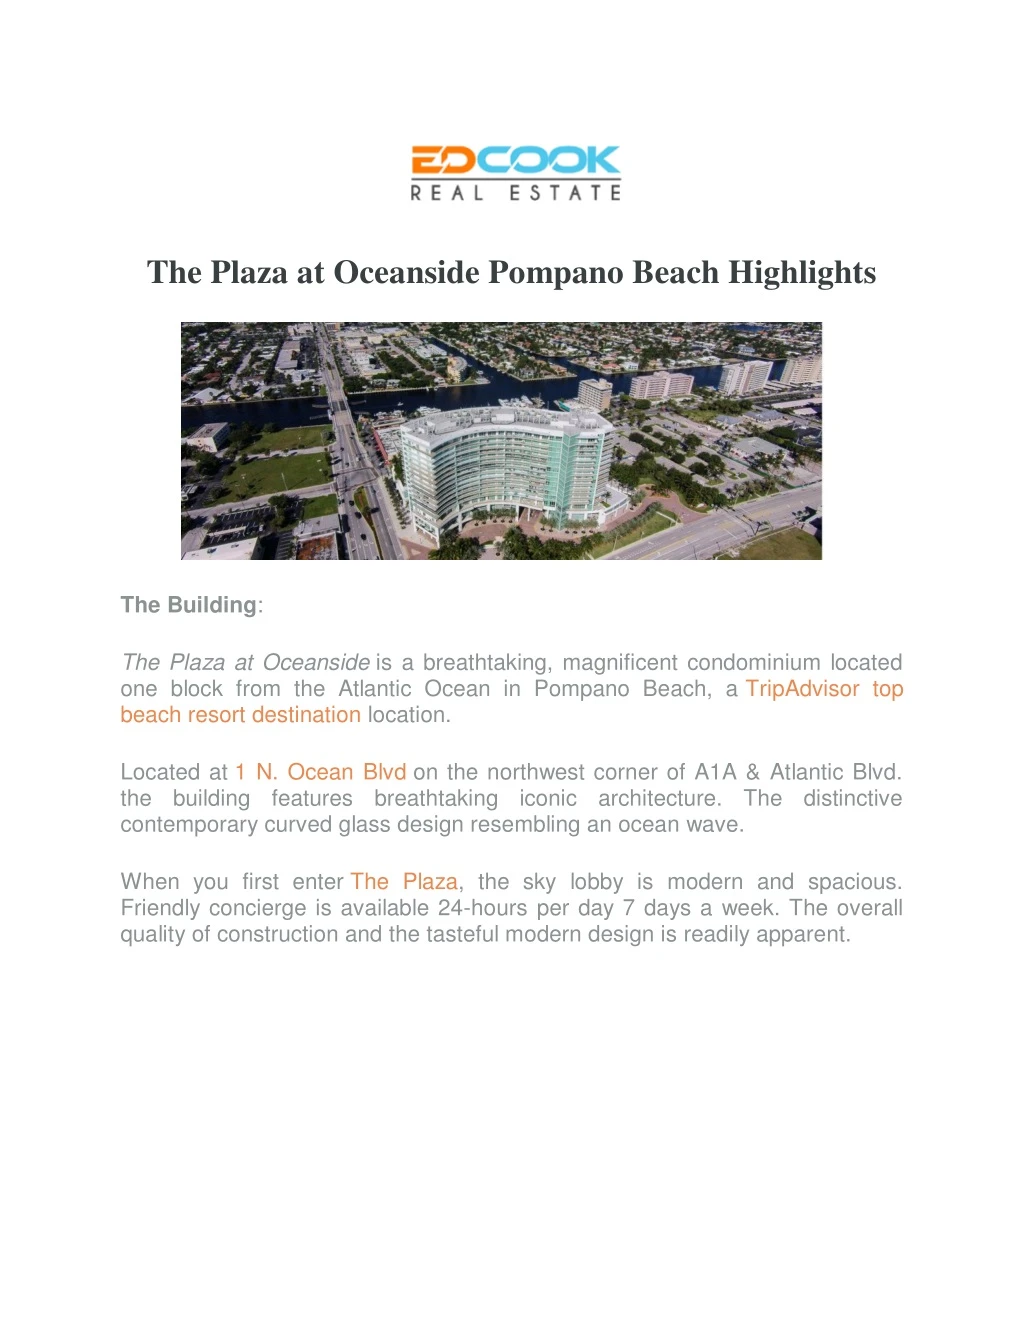 the plaza at oceanside pompano beach highlights